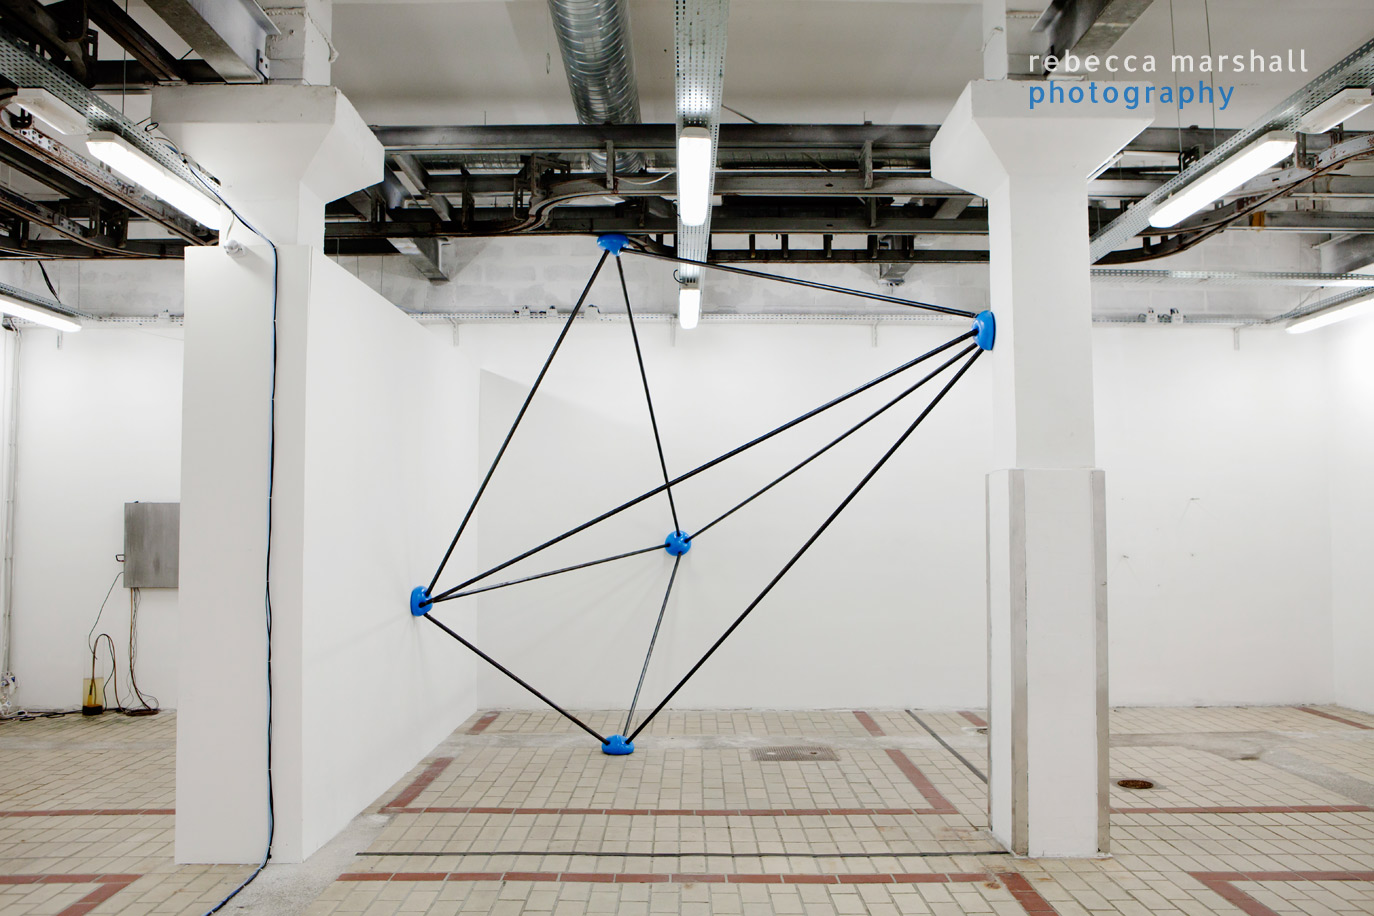 Photograph of a modern art installation in a white industrial gallery space